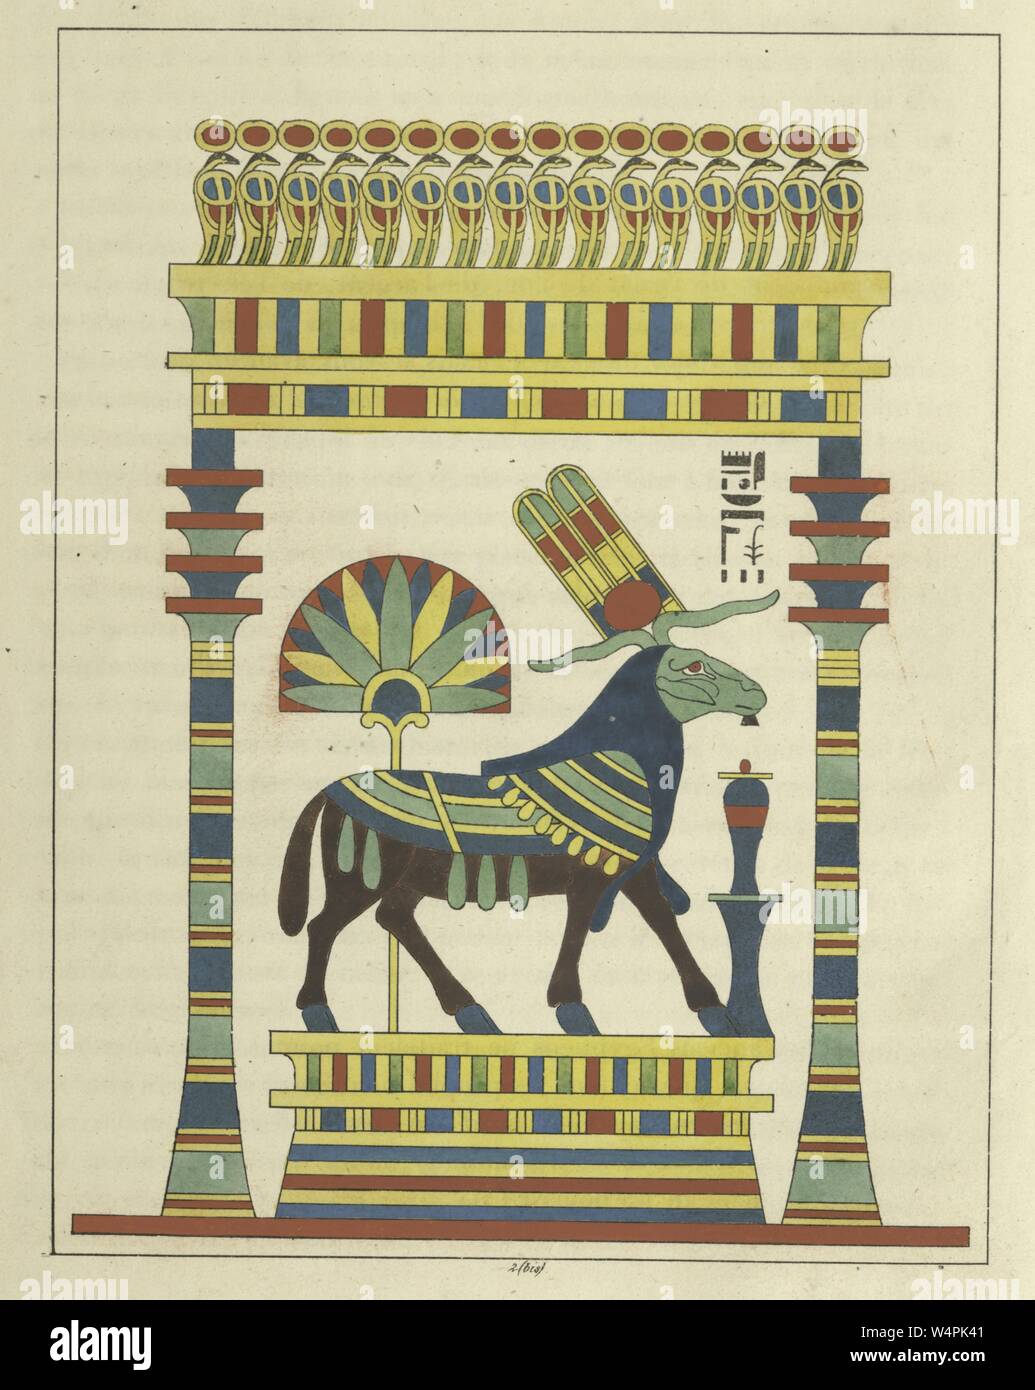 Ancient Egyptian emblem of the god Amun, king of the gods and the champion of the poor and troubled, illustration from the book 'Pantheon Egyptien' by Leon Jean Joseph Dubois, 1824. From the New York Public Library. () Stock Photo